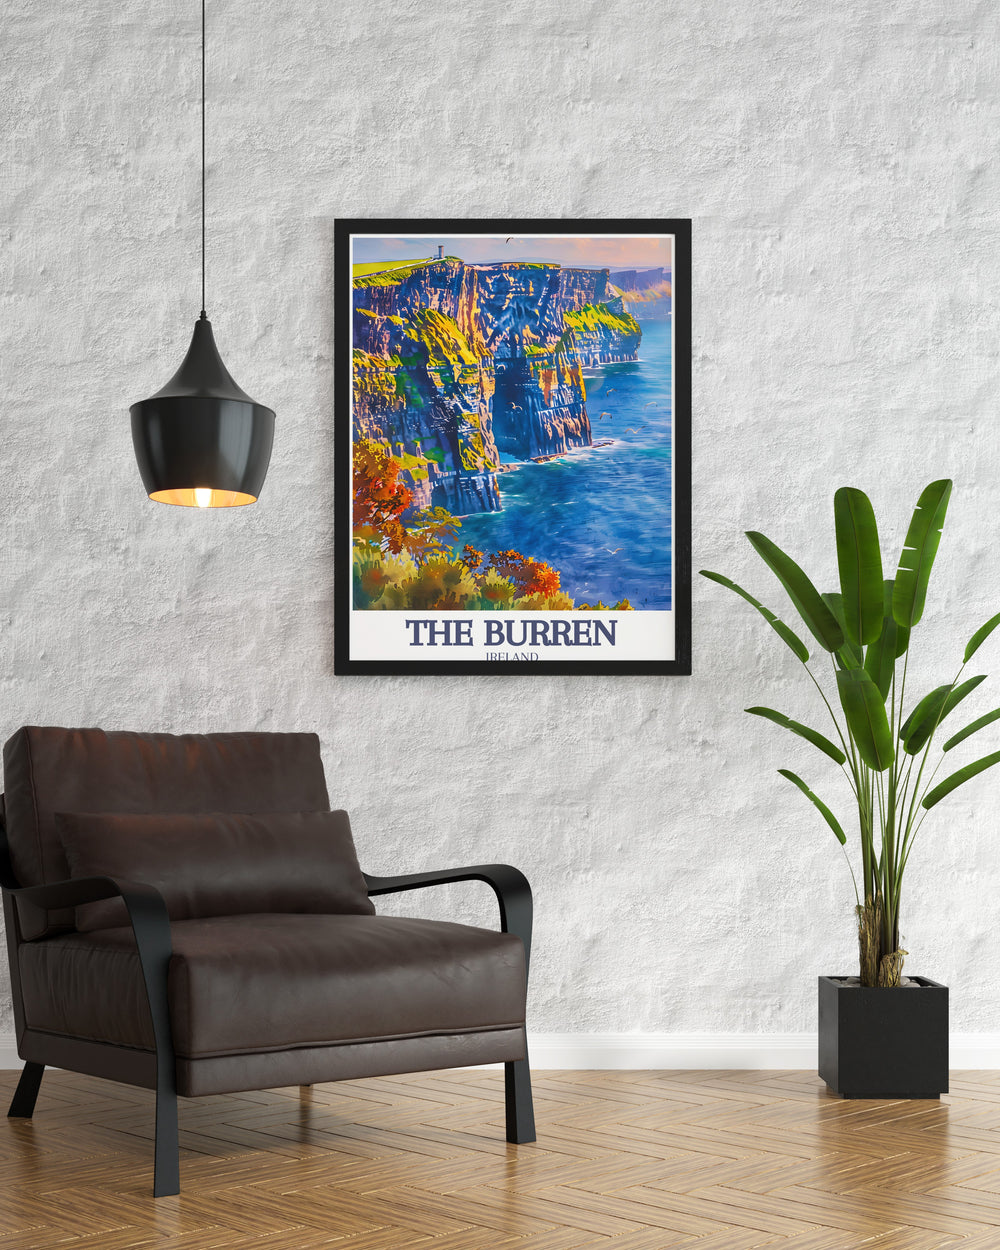 Beautiful Burren National Park County Clare wall art capturing the unique limestone pavements and vibrant wildflowers alongside the breathtaking Cliffs of Moher Atlantic Ocean ideal for home decor and gifts